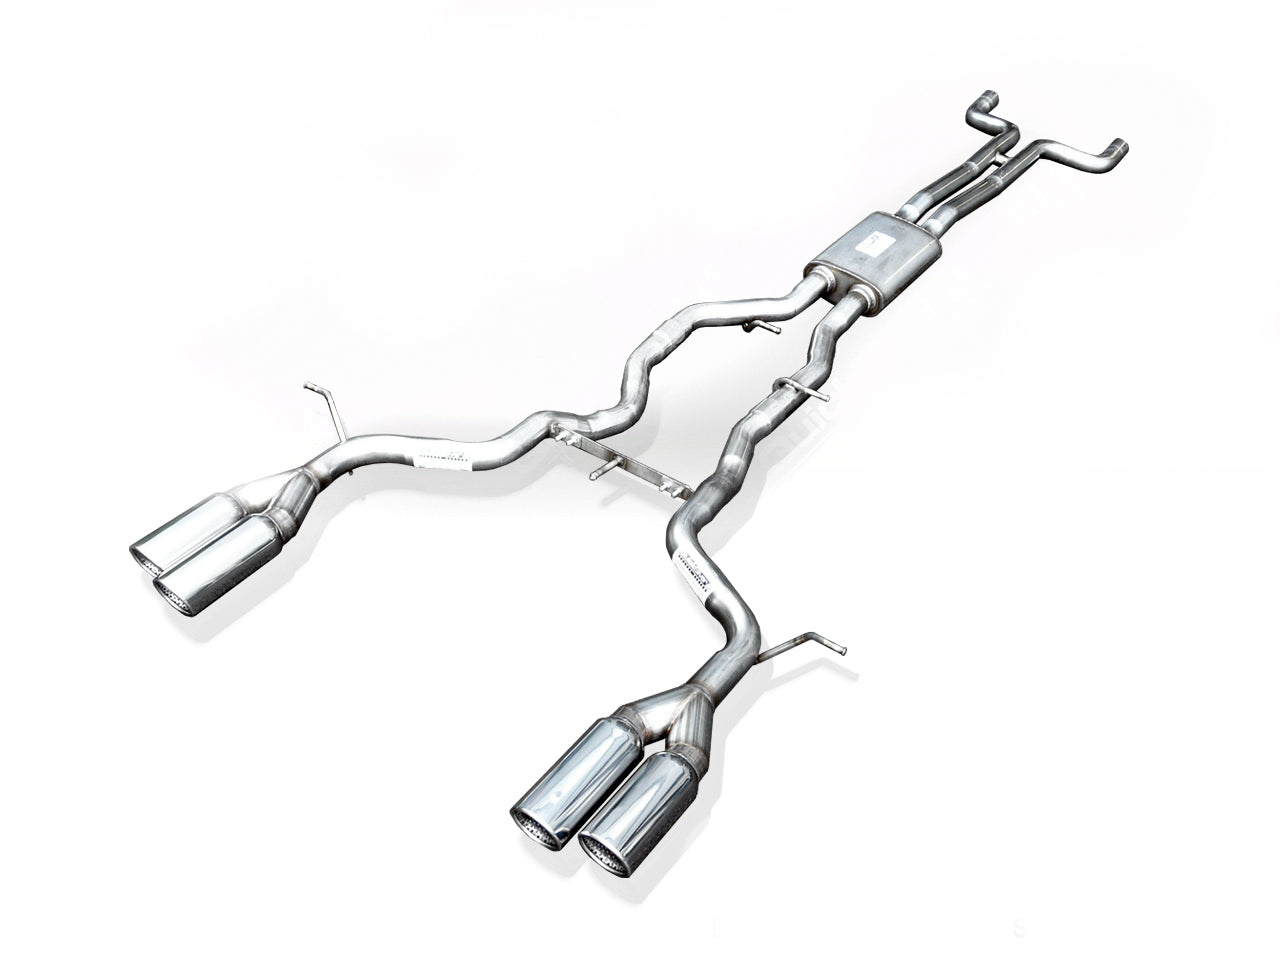 Jaguar XKR, XKR-S 5.0 Super Charged Sport Exhaust (2009-14) - QuickSilver Exhausts